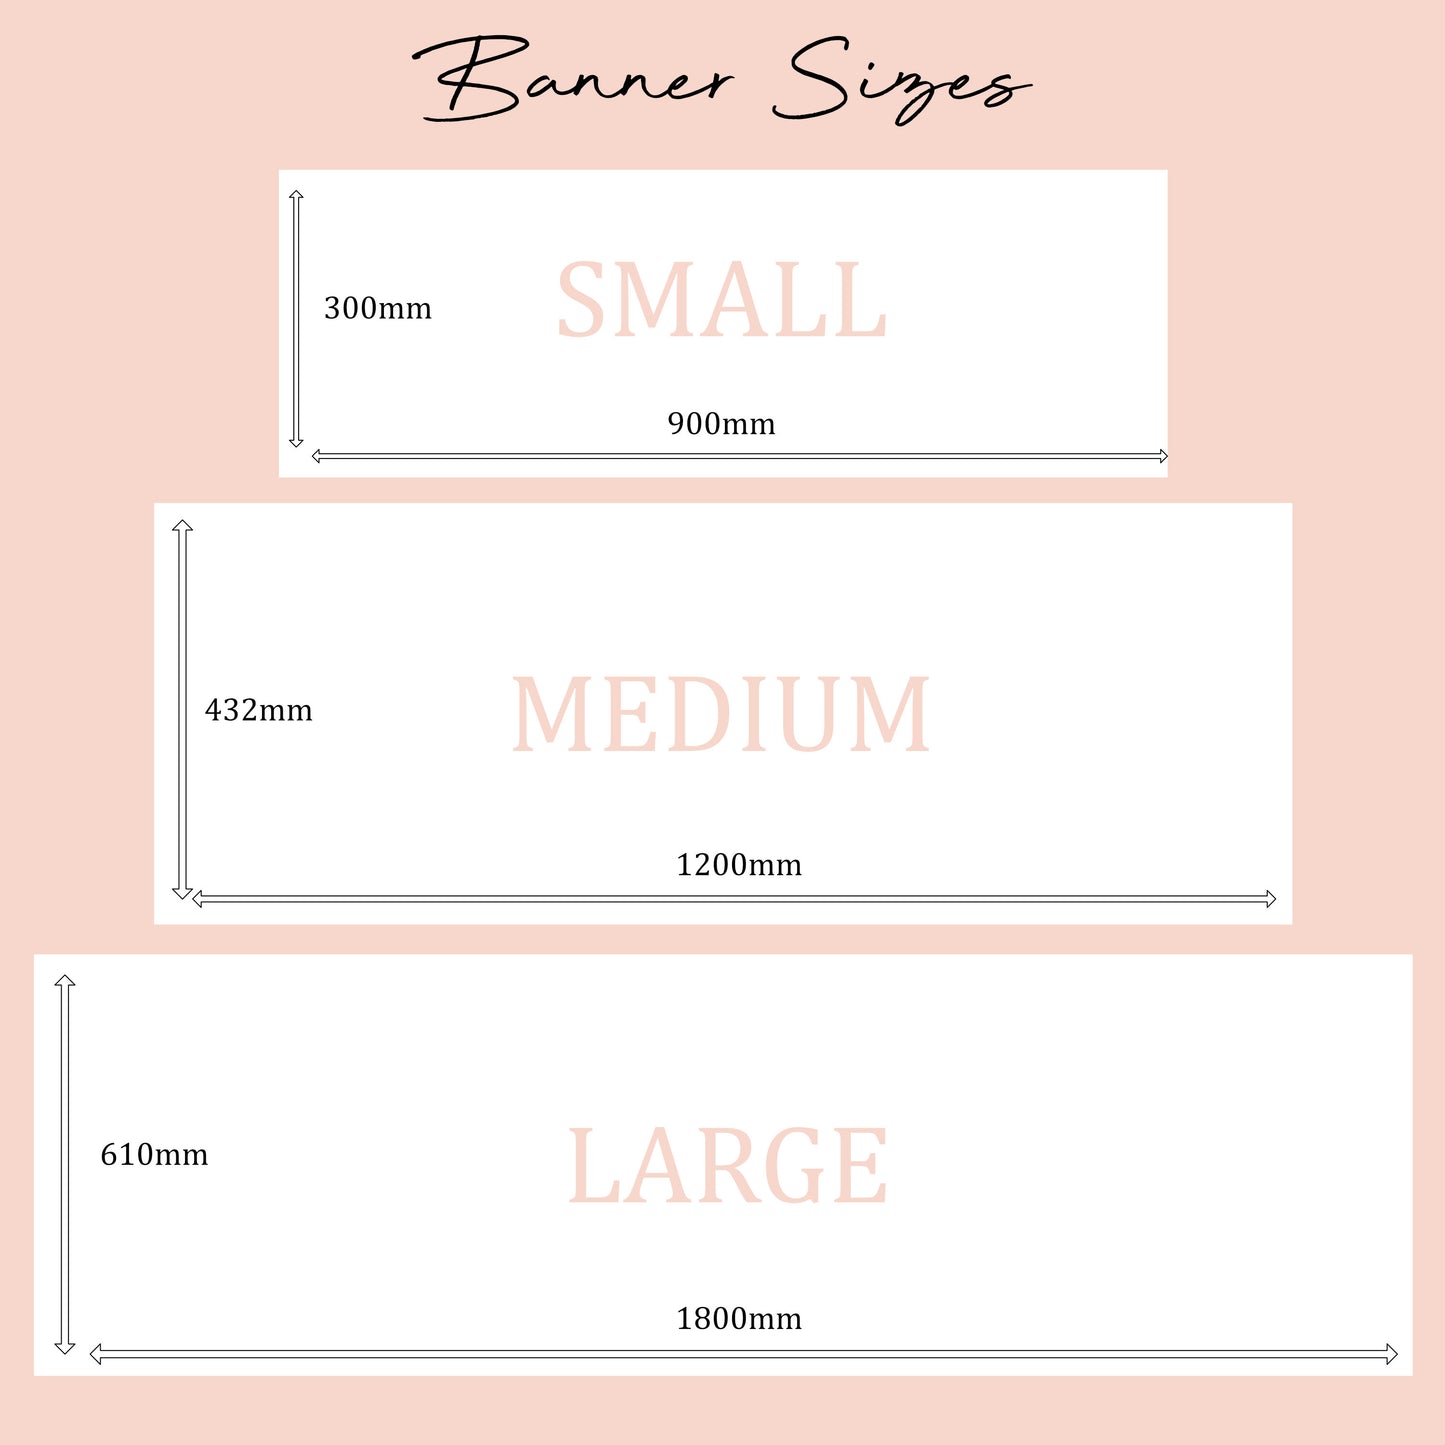 Personalised Anniversary Banner Congratulations Grey Marble Champagne